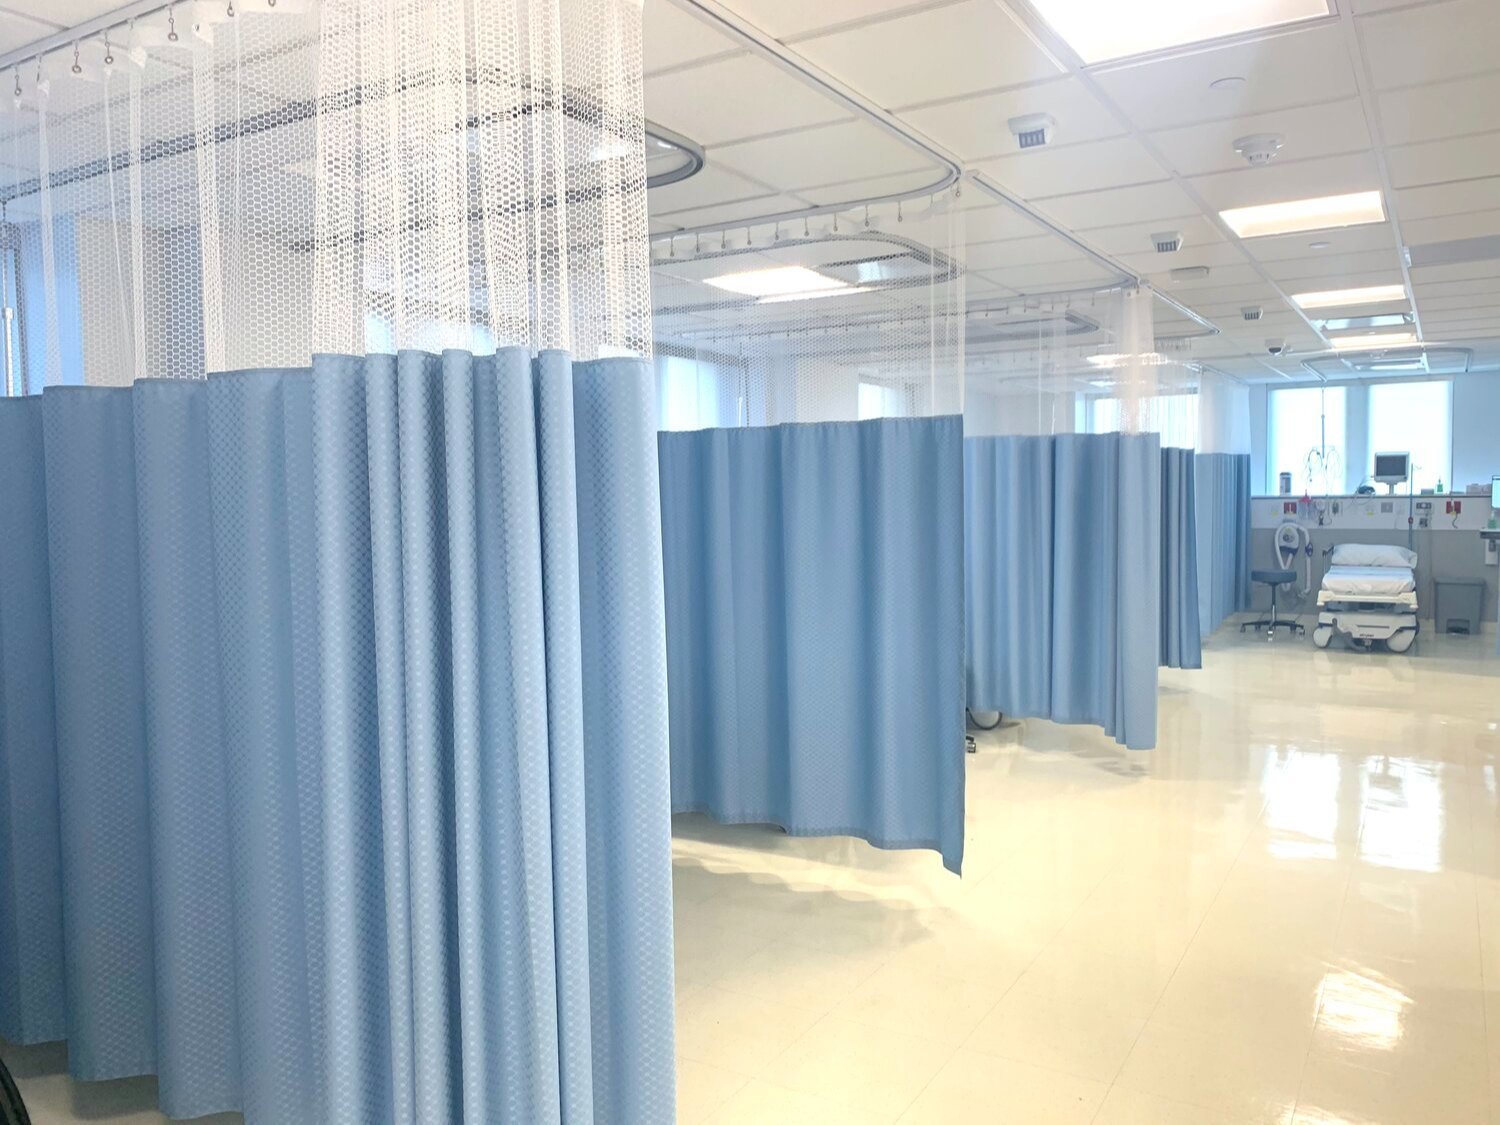 The Essential Elements of Hospital Curtain Tracks - Technoinsert